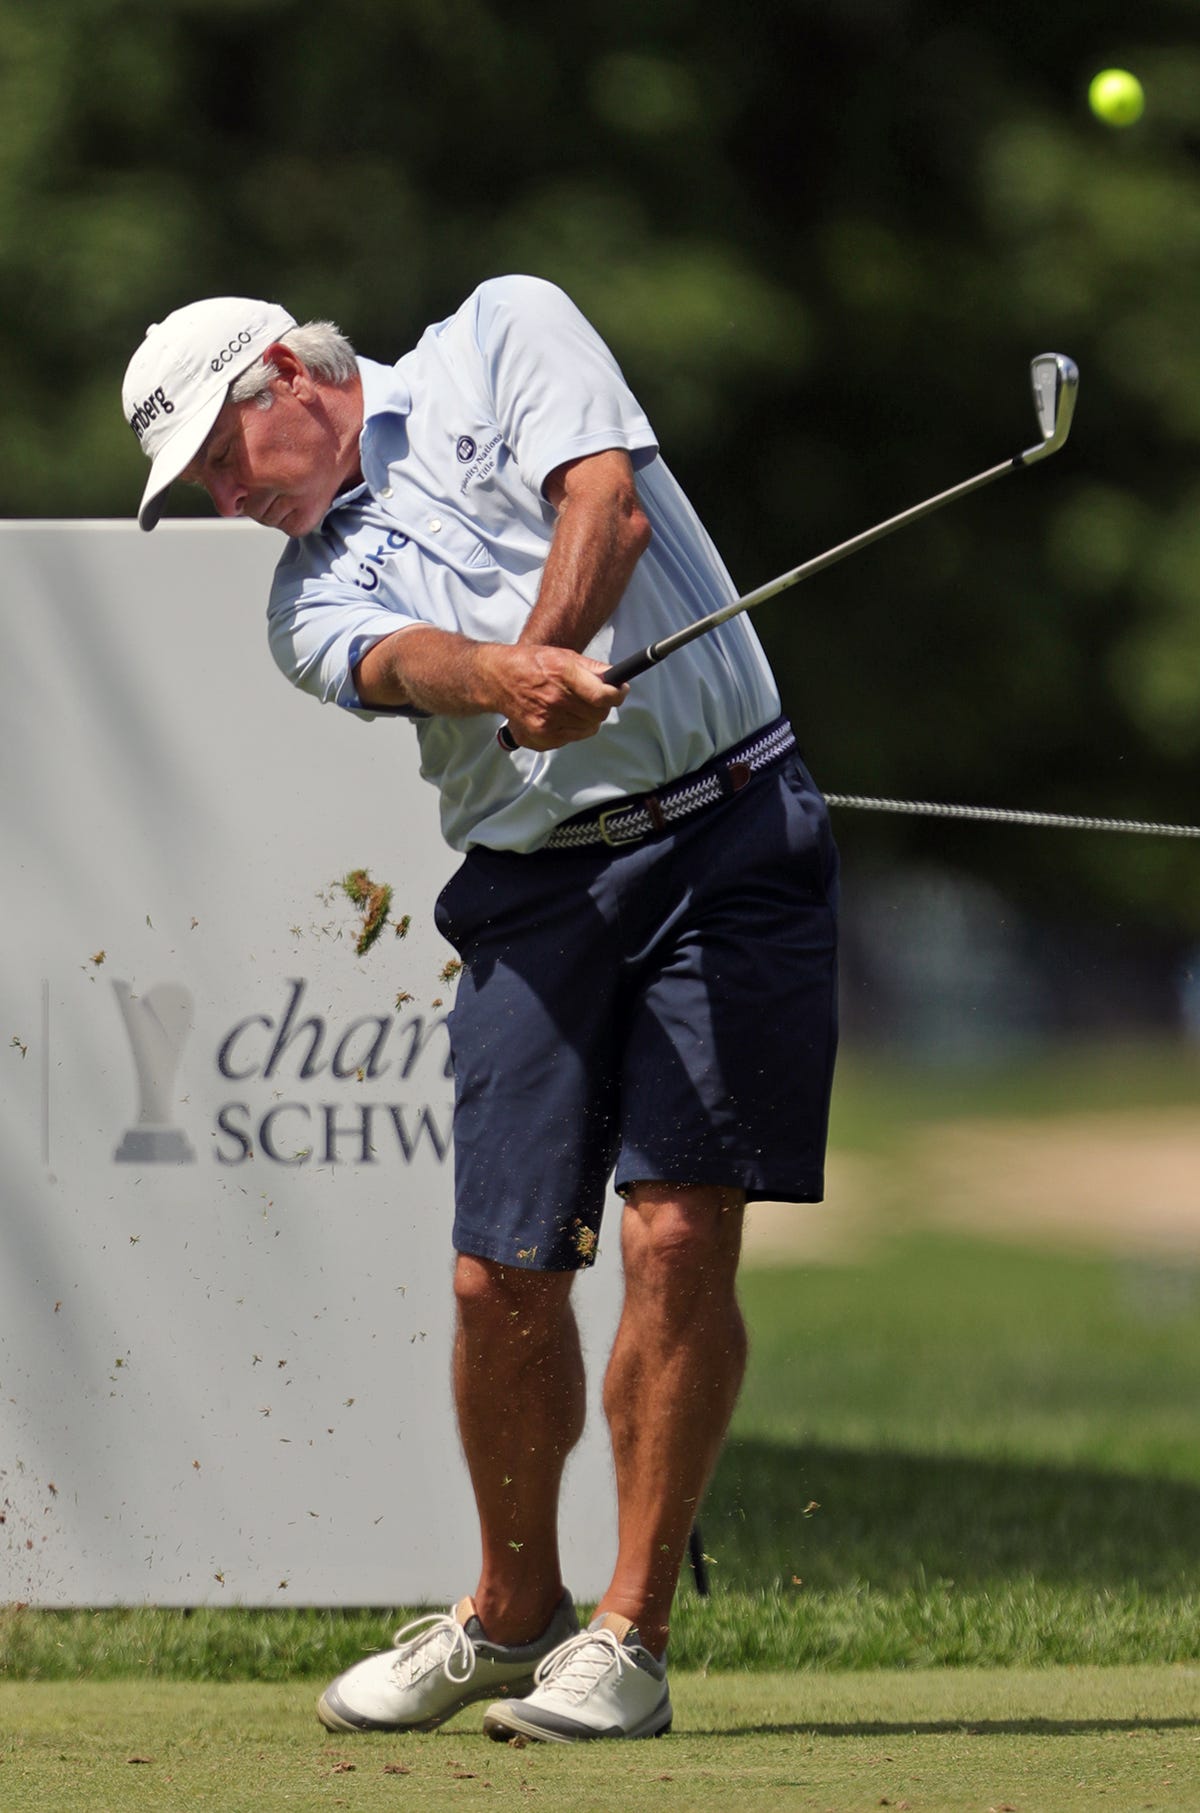 Fred Couples loves returning to Akron Senior Players